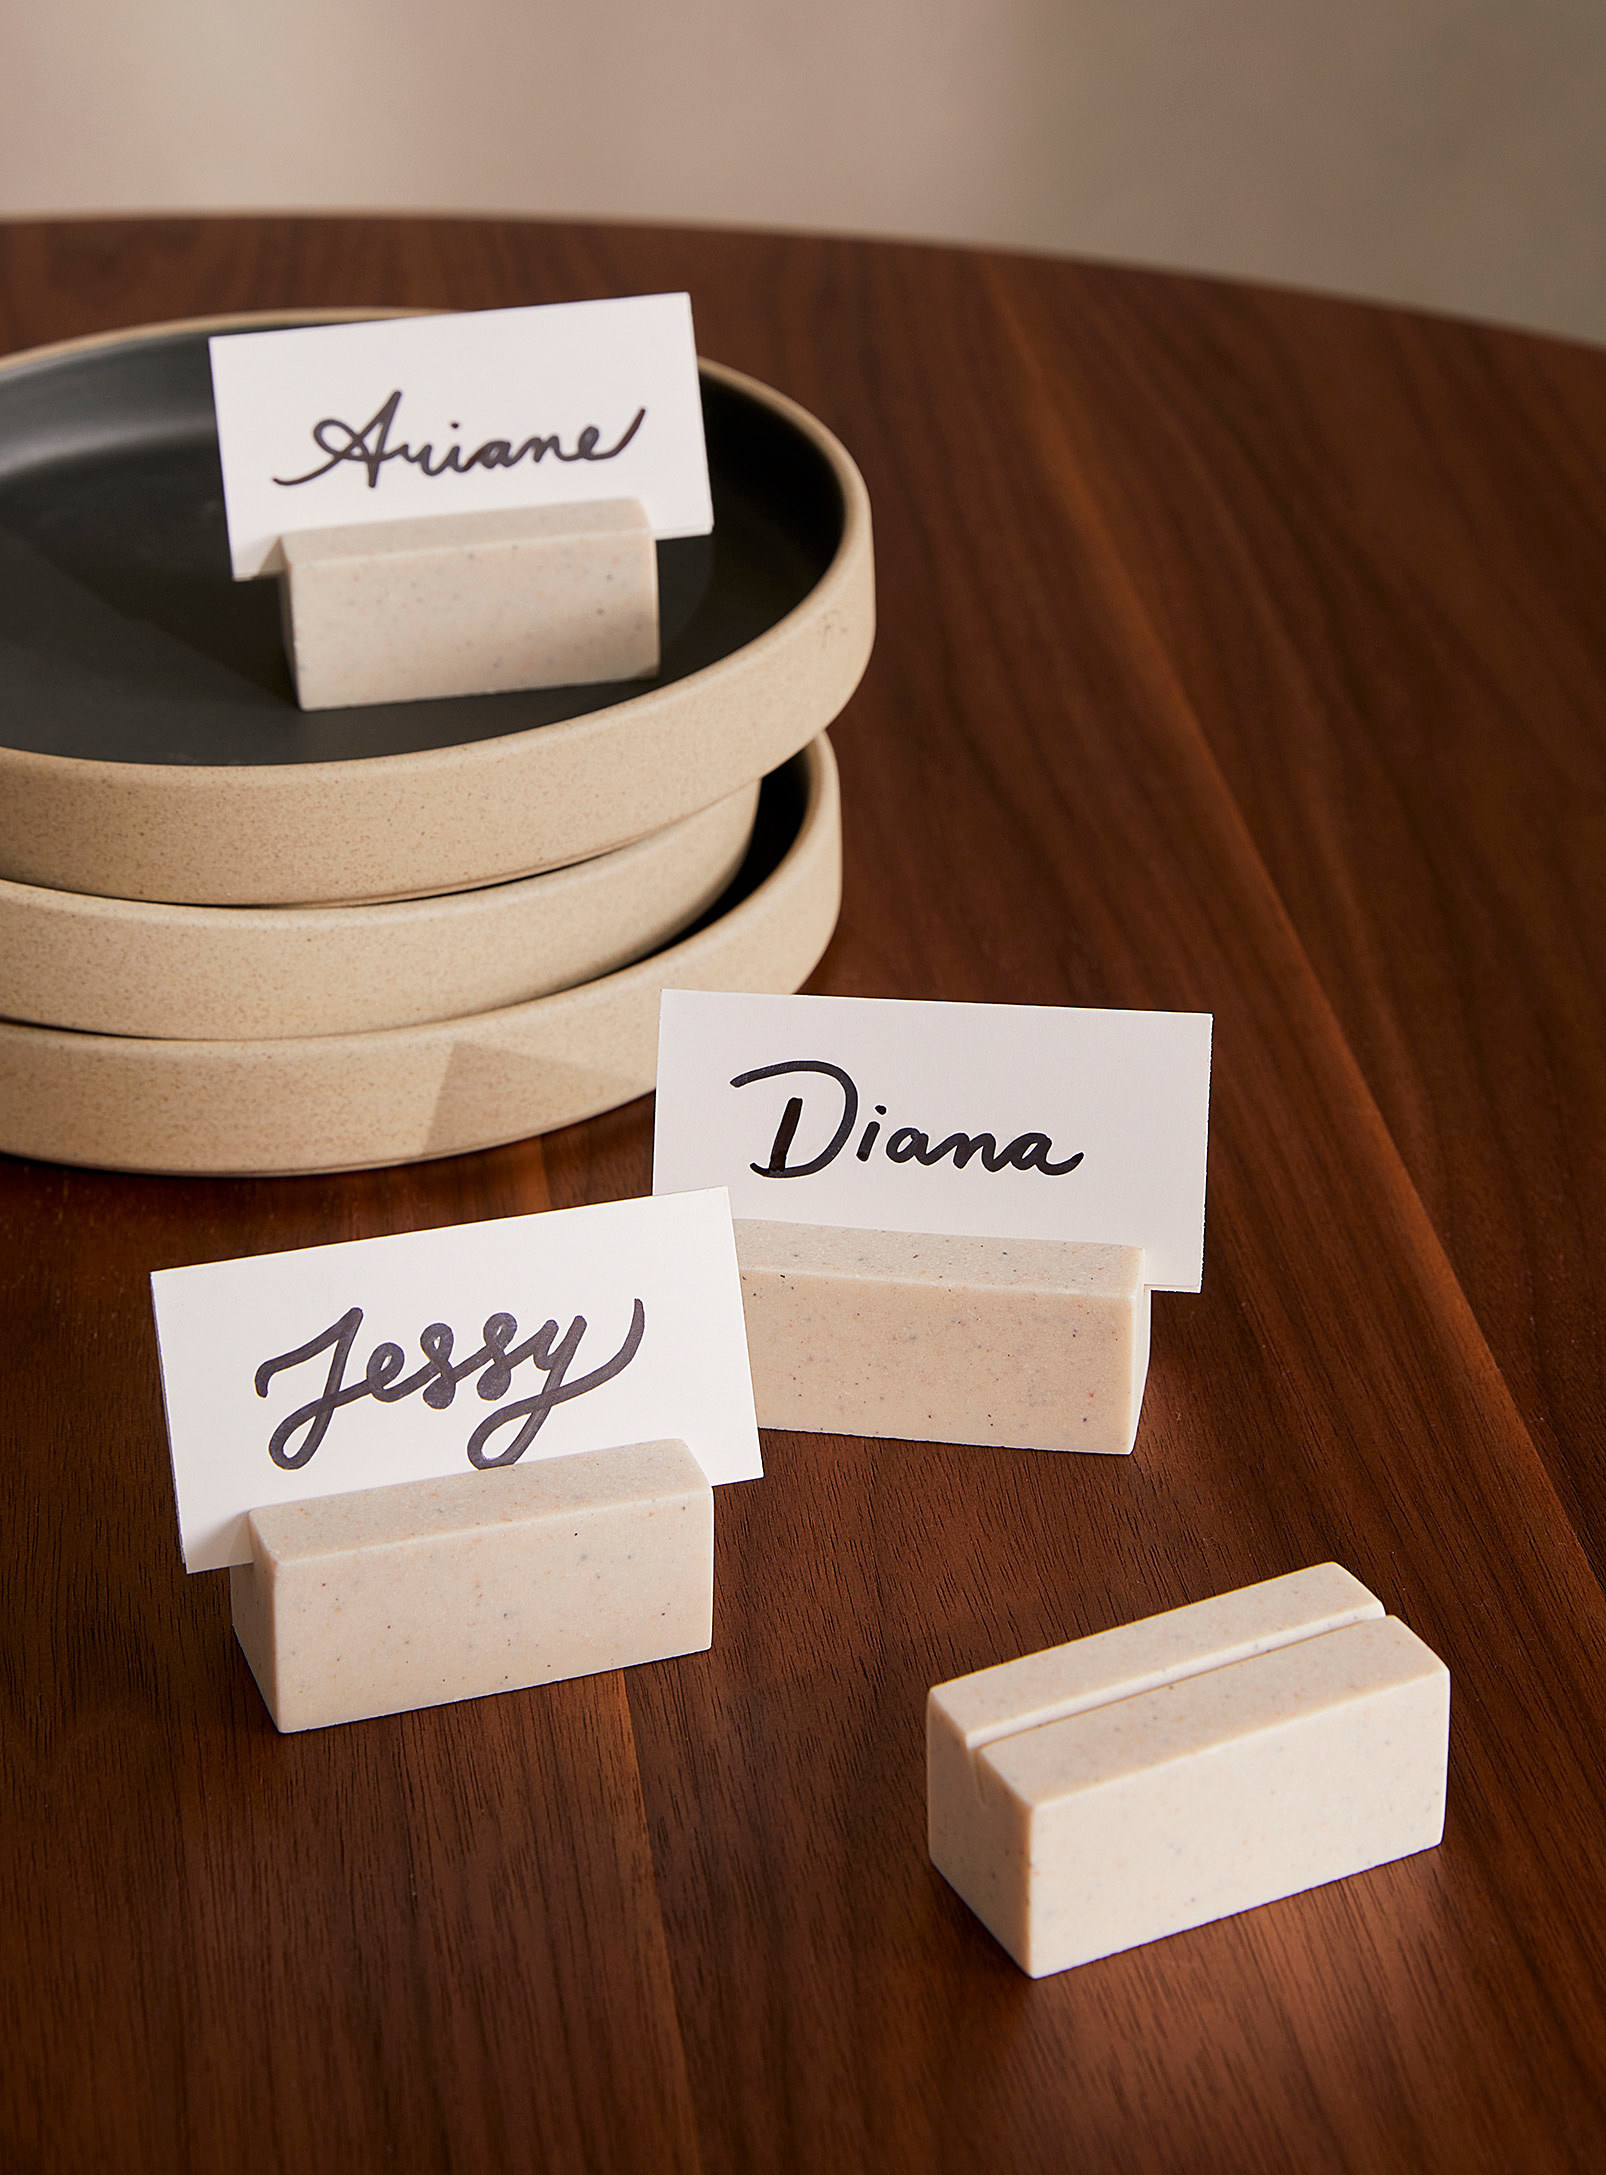 the place card holders with little cardboard rectangles with people&#x27;s names on them